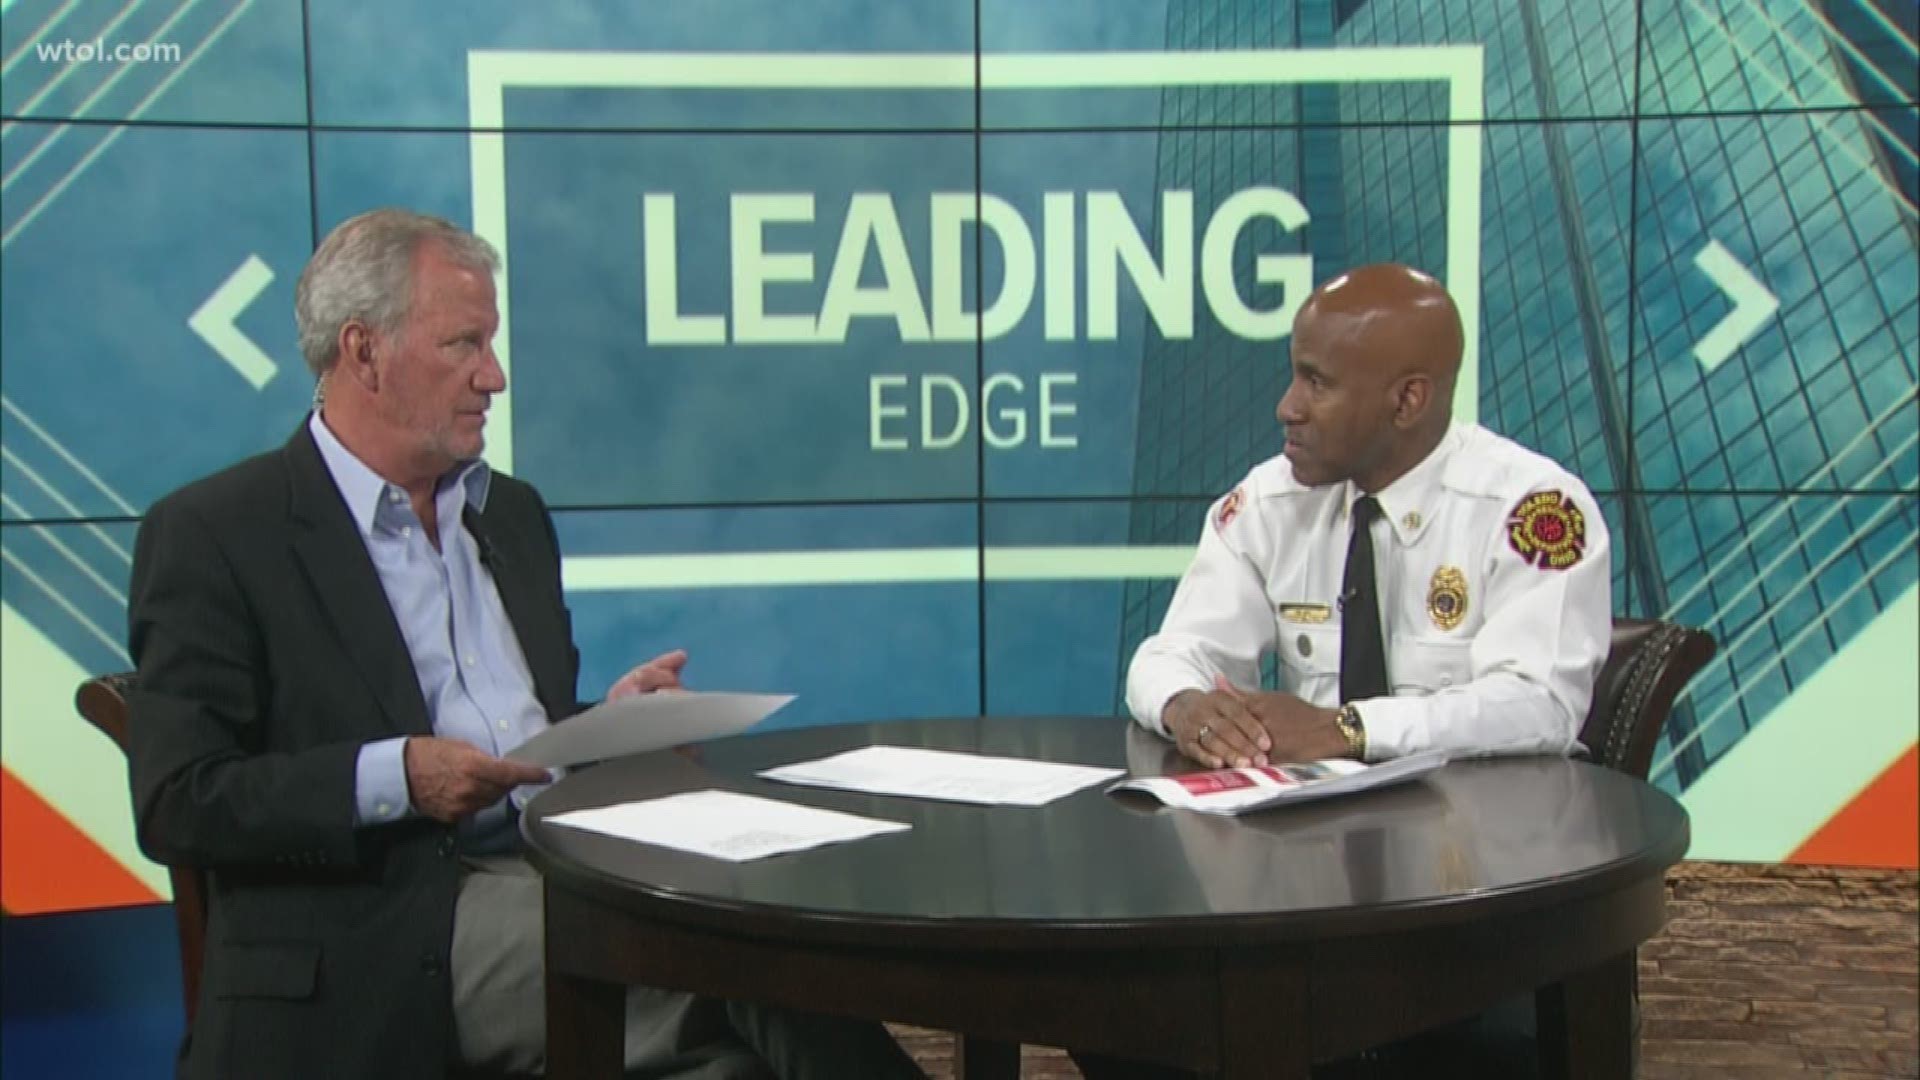 Toledo Fire Chief Brian Byrd discusses the influx of 911 calls at the Leading Edge table.